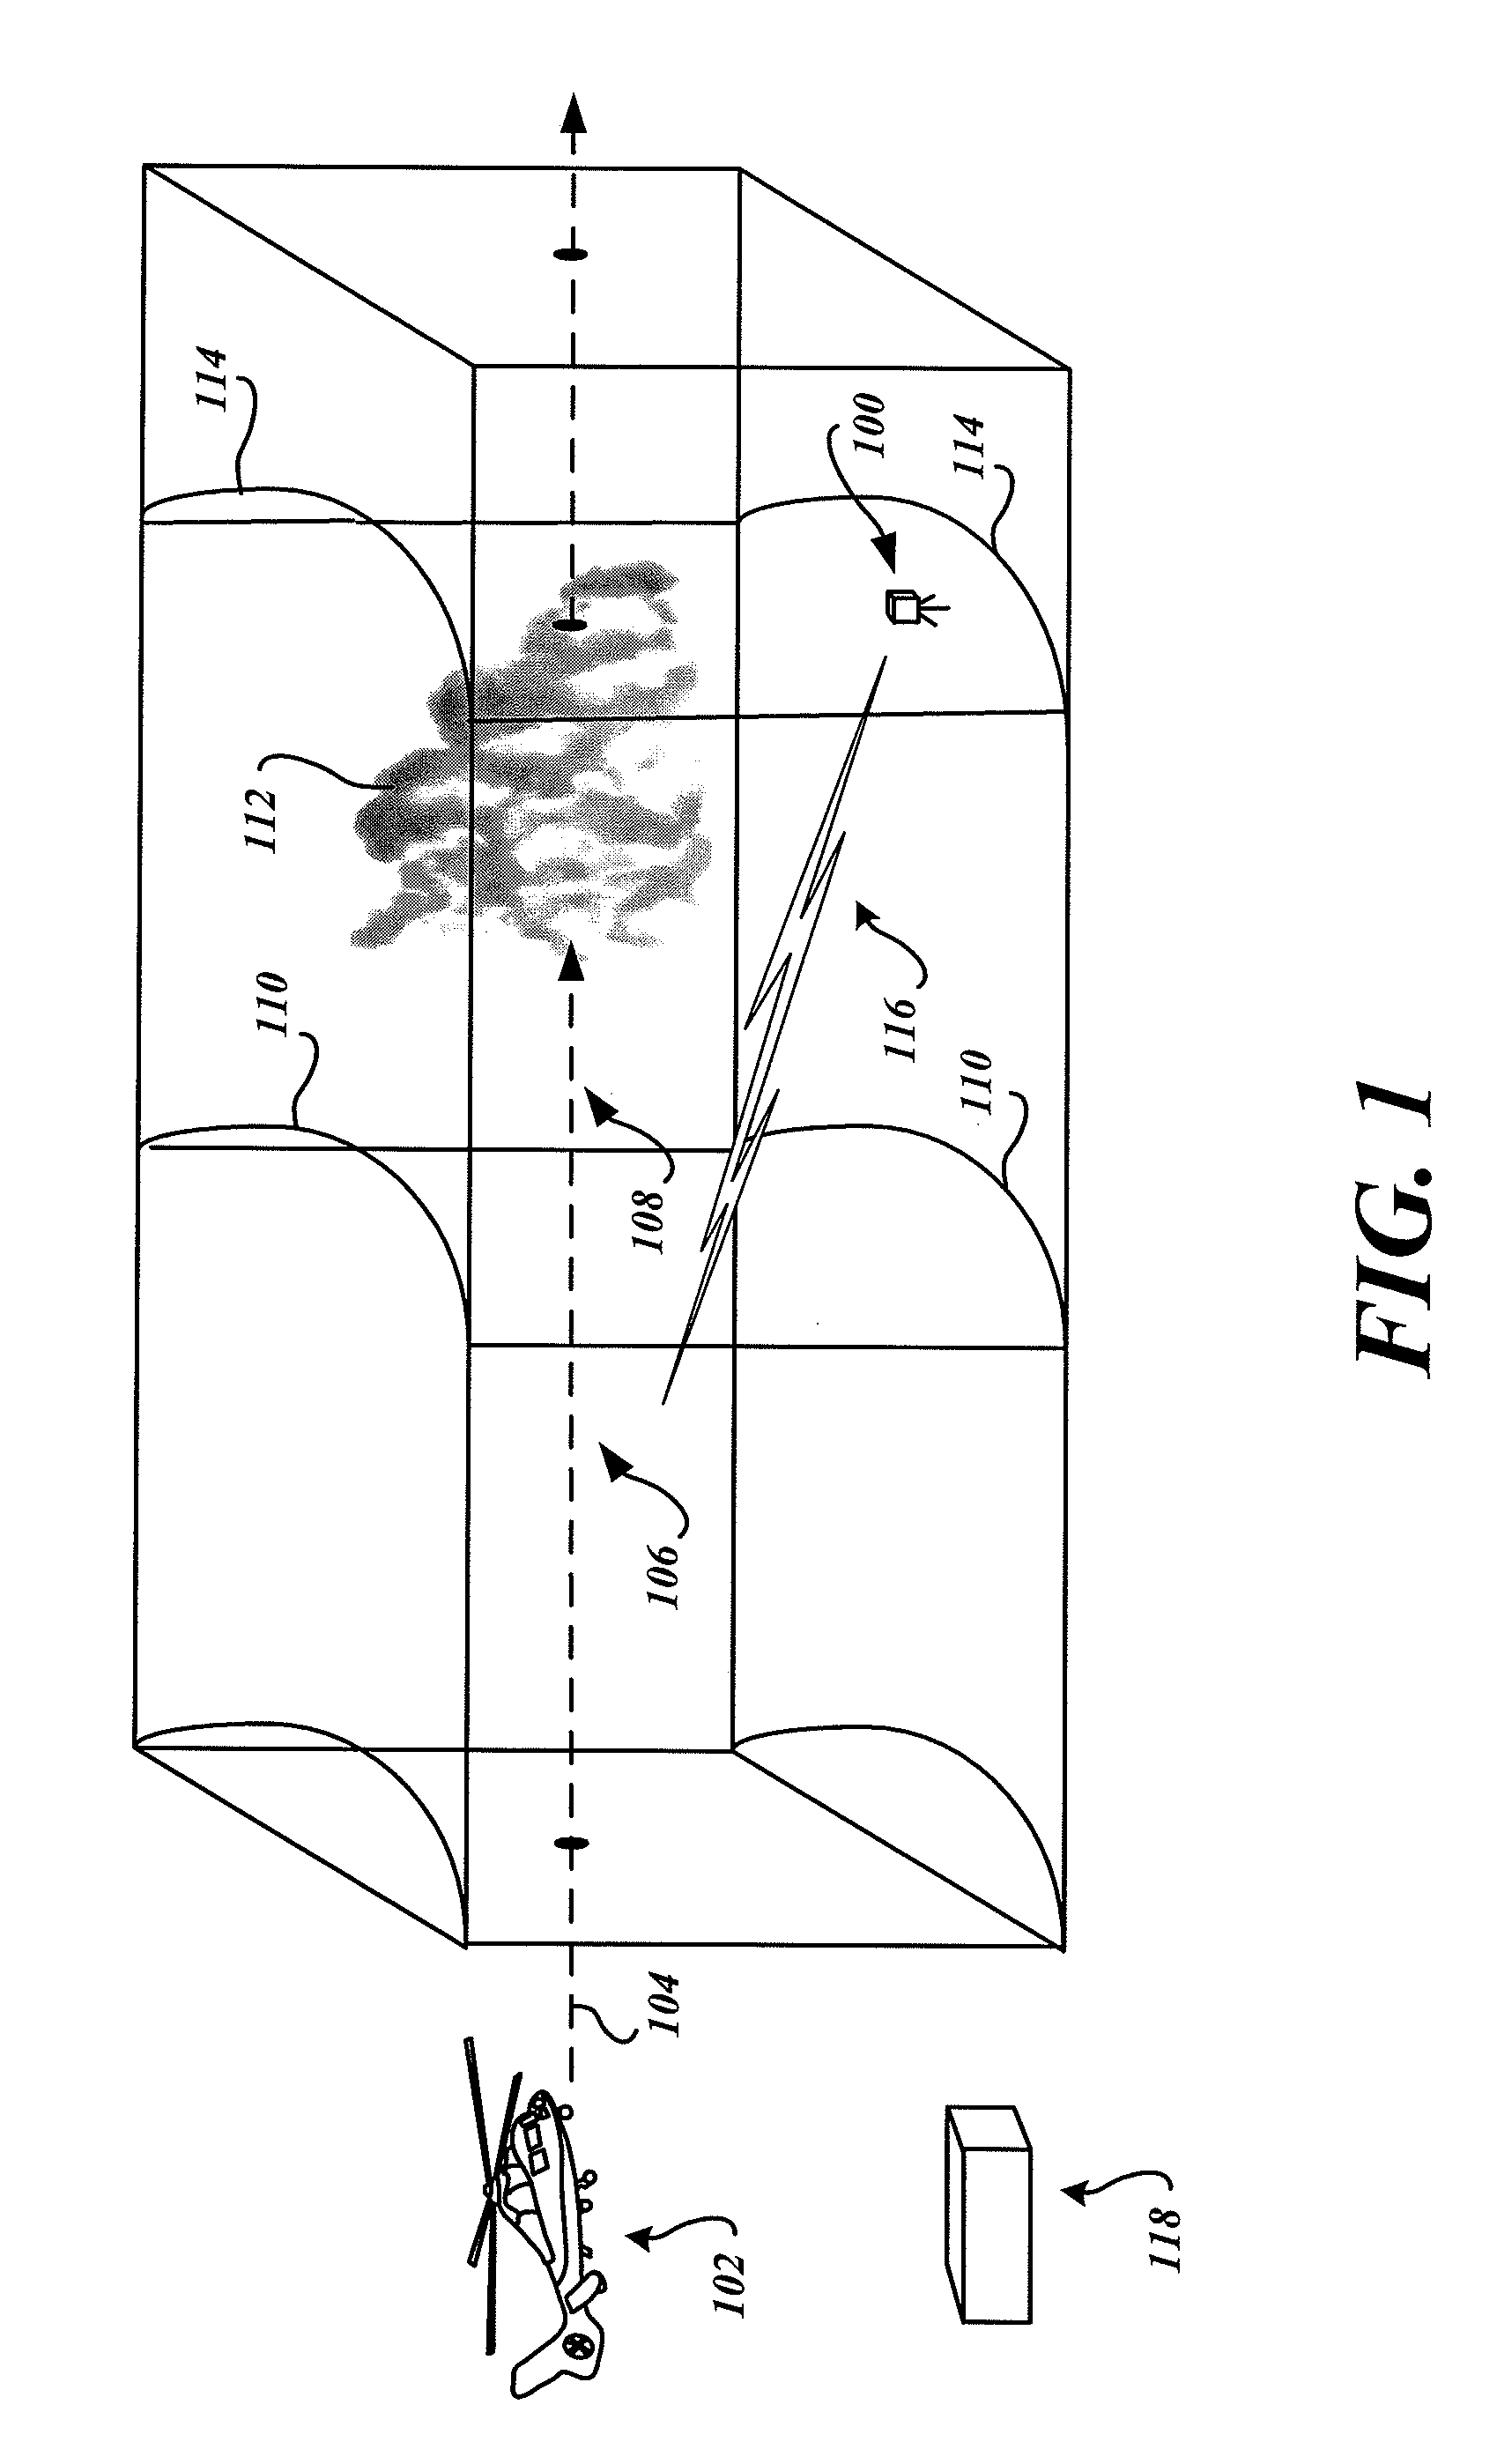 Systems and methods for remote monitoring of weather